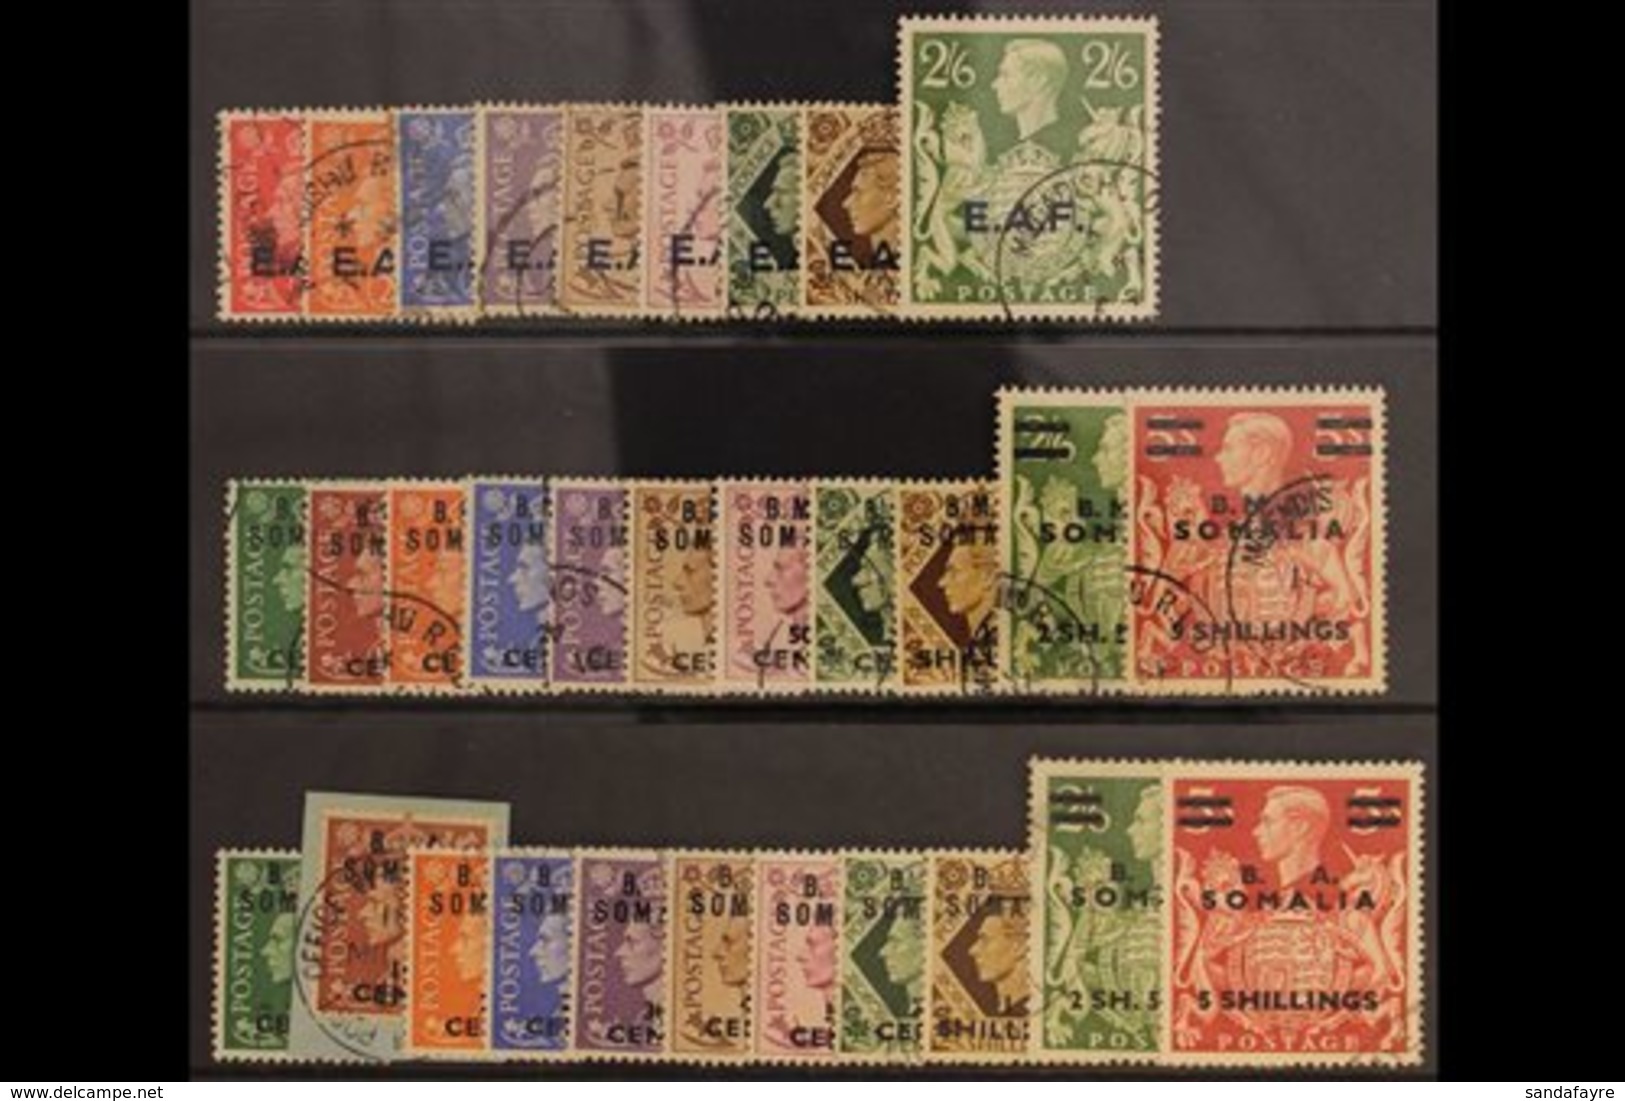 SOMALIA  1943 - 50 Complete Used Issues, SG S1/31, Fine To Very Fine Used. (31 Stamps) For More Images, Please Visit Htt - Italian Eastern Africa